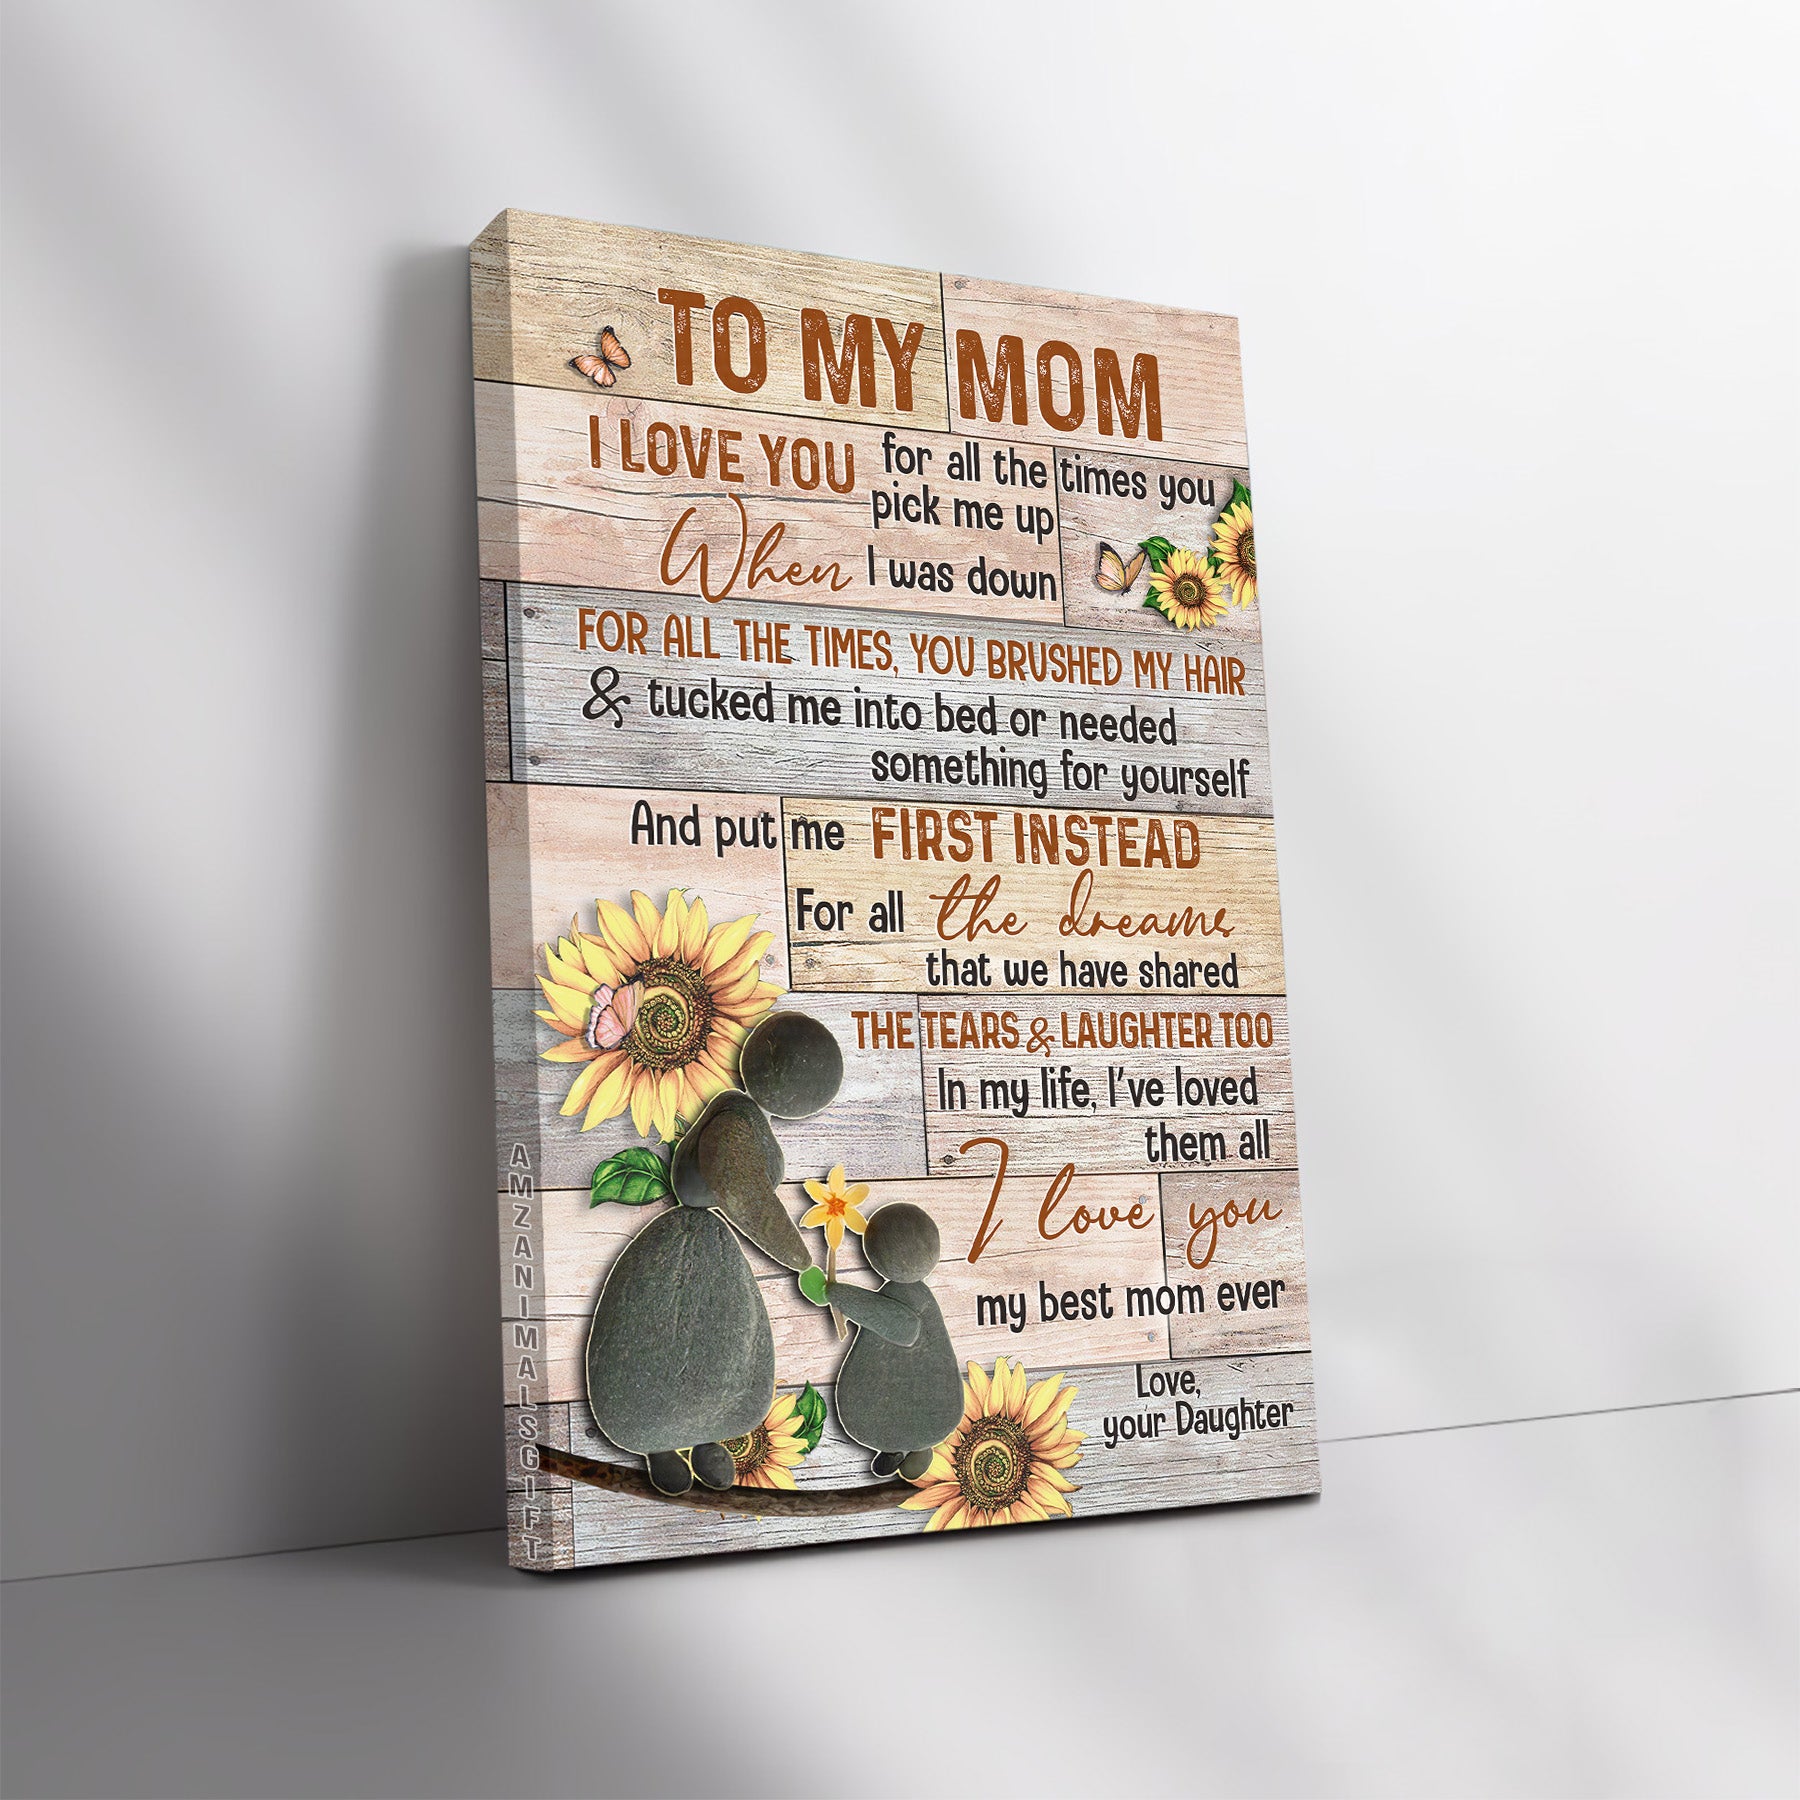 Family Premium Wrapped Portrait Canvas - Daughter To Mom, Sunflower, Mother And Child, I Love You For All The Times - Gift For Members Family